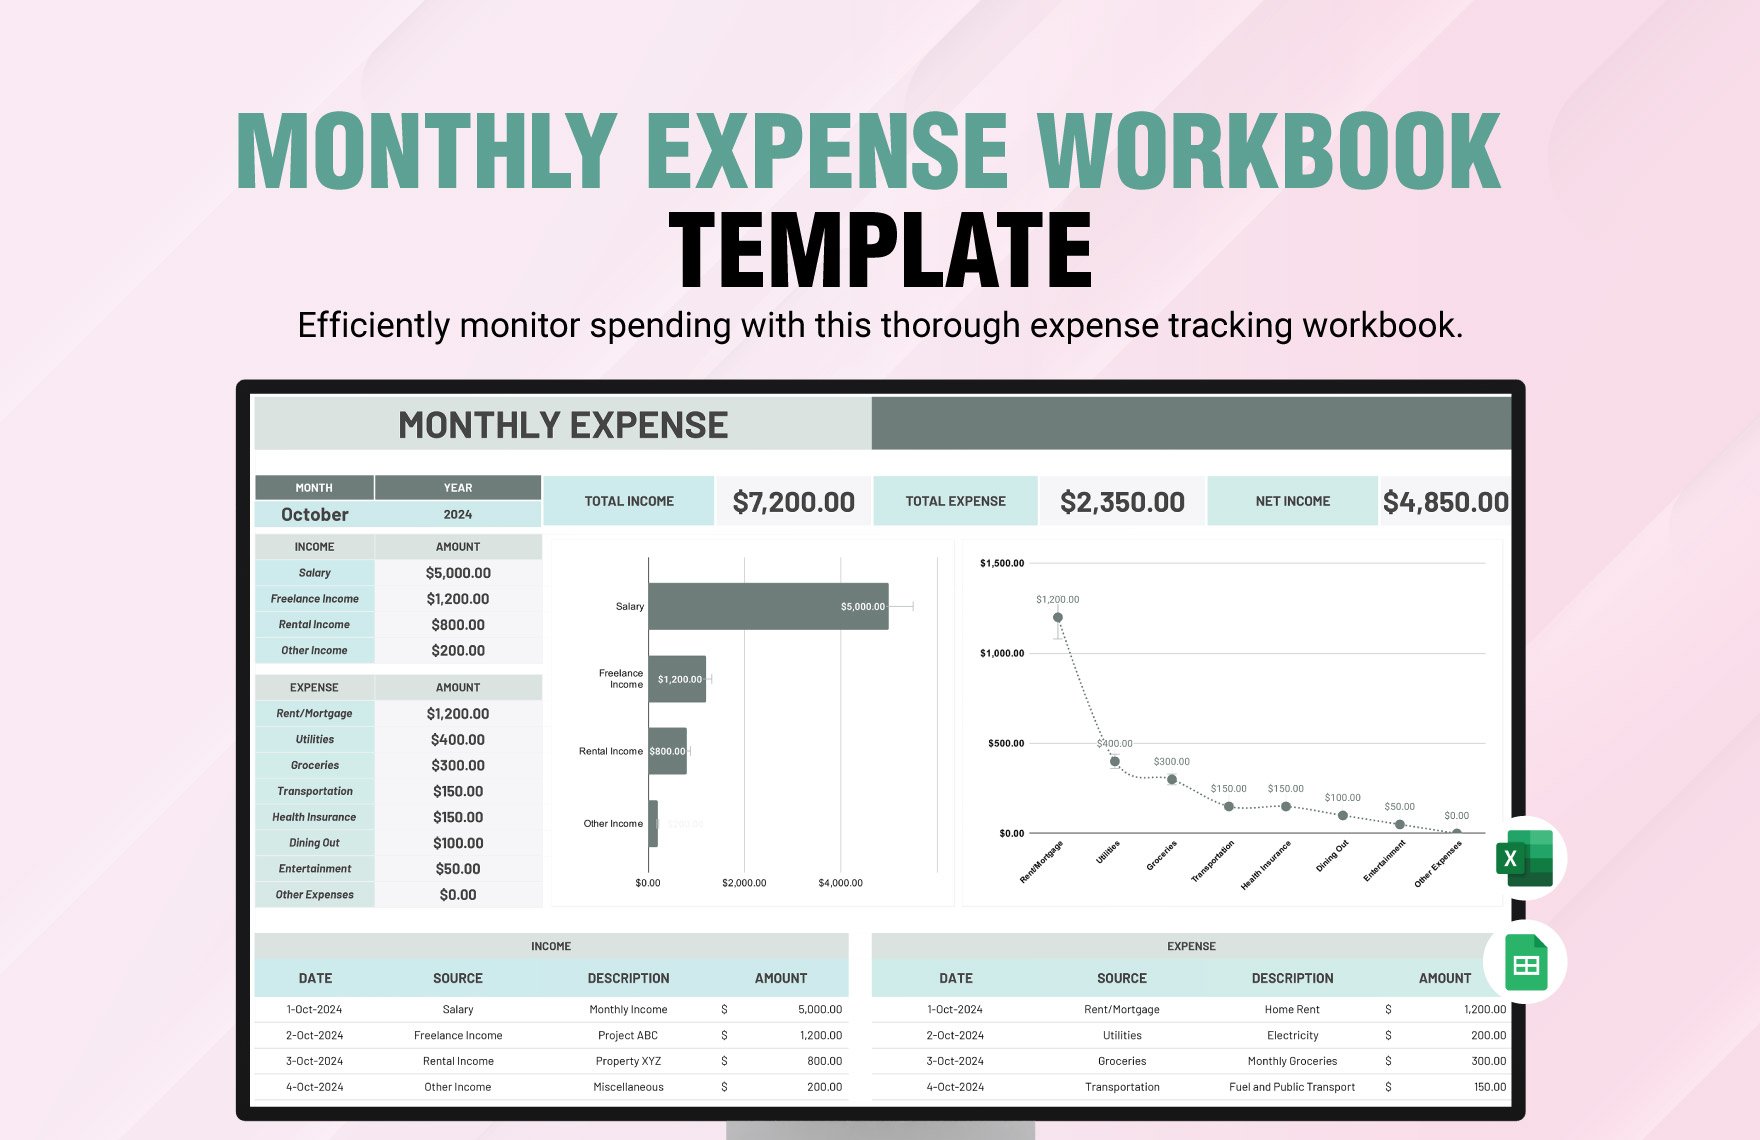 Monthly Expense Workbook Template in Excel, Google Sheets